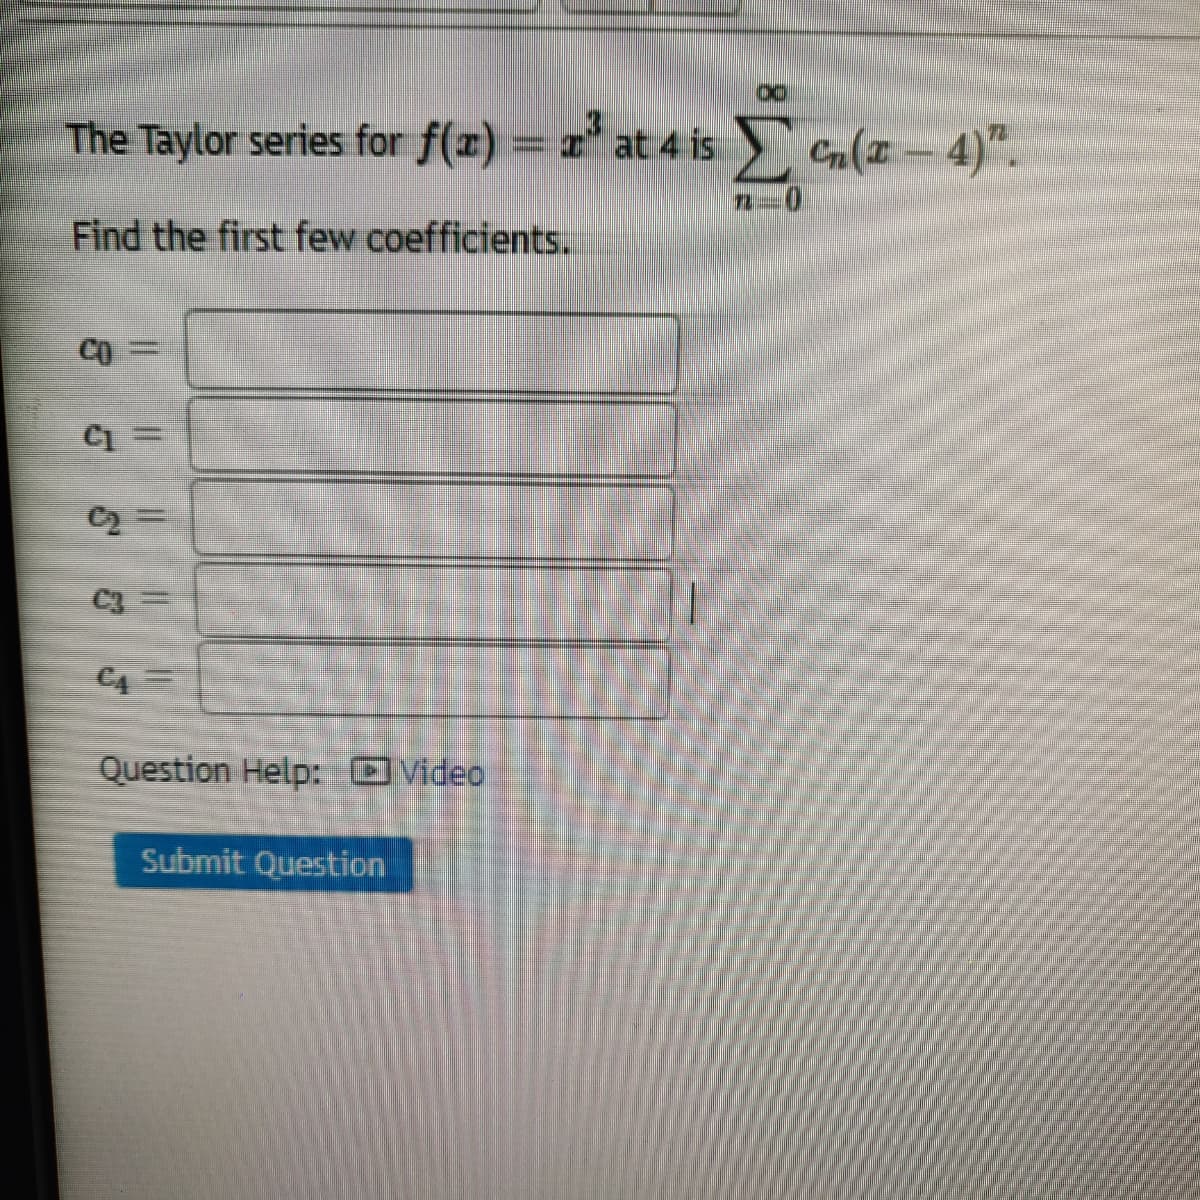 The Taylor series for f(x) = at 4 is Cn(a-4)".
72-0
Find the first few coefficients.
CO
C2 =
C3
C4
Question Help: Video
Submit Question
